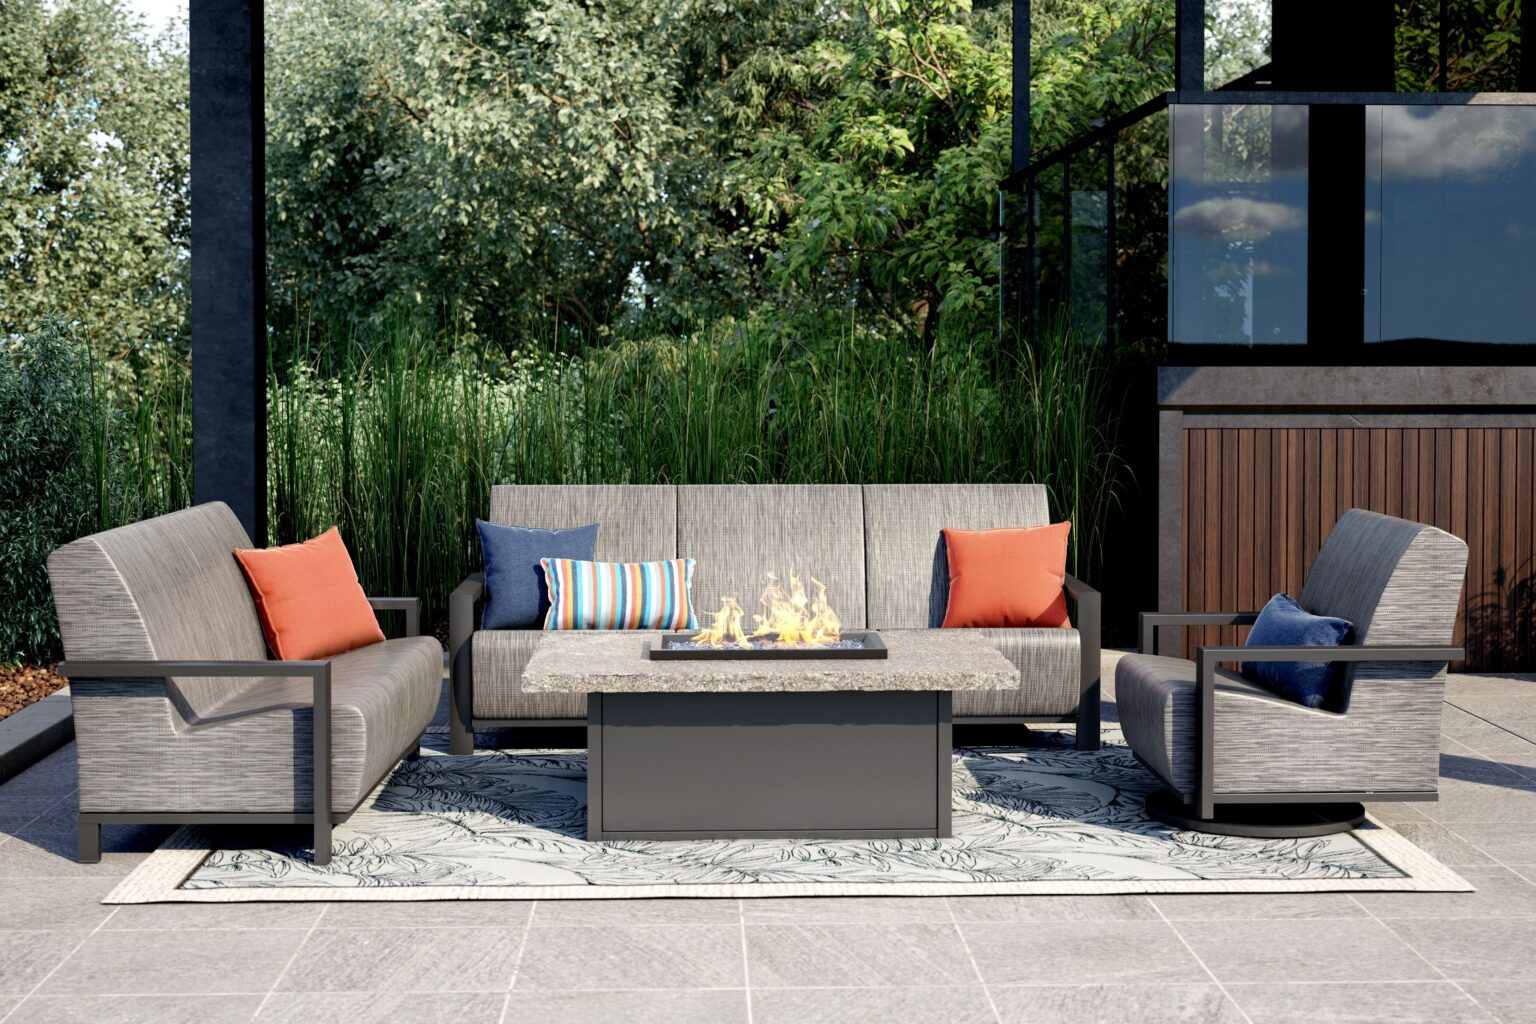 Elements Air shadow patio furniture around a fire table that has been kept in immaculate condition